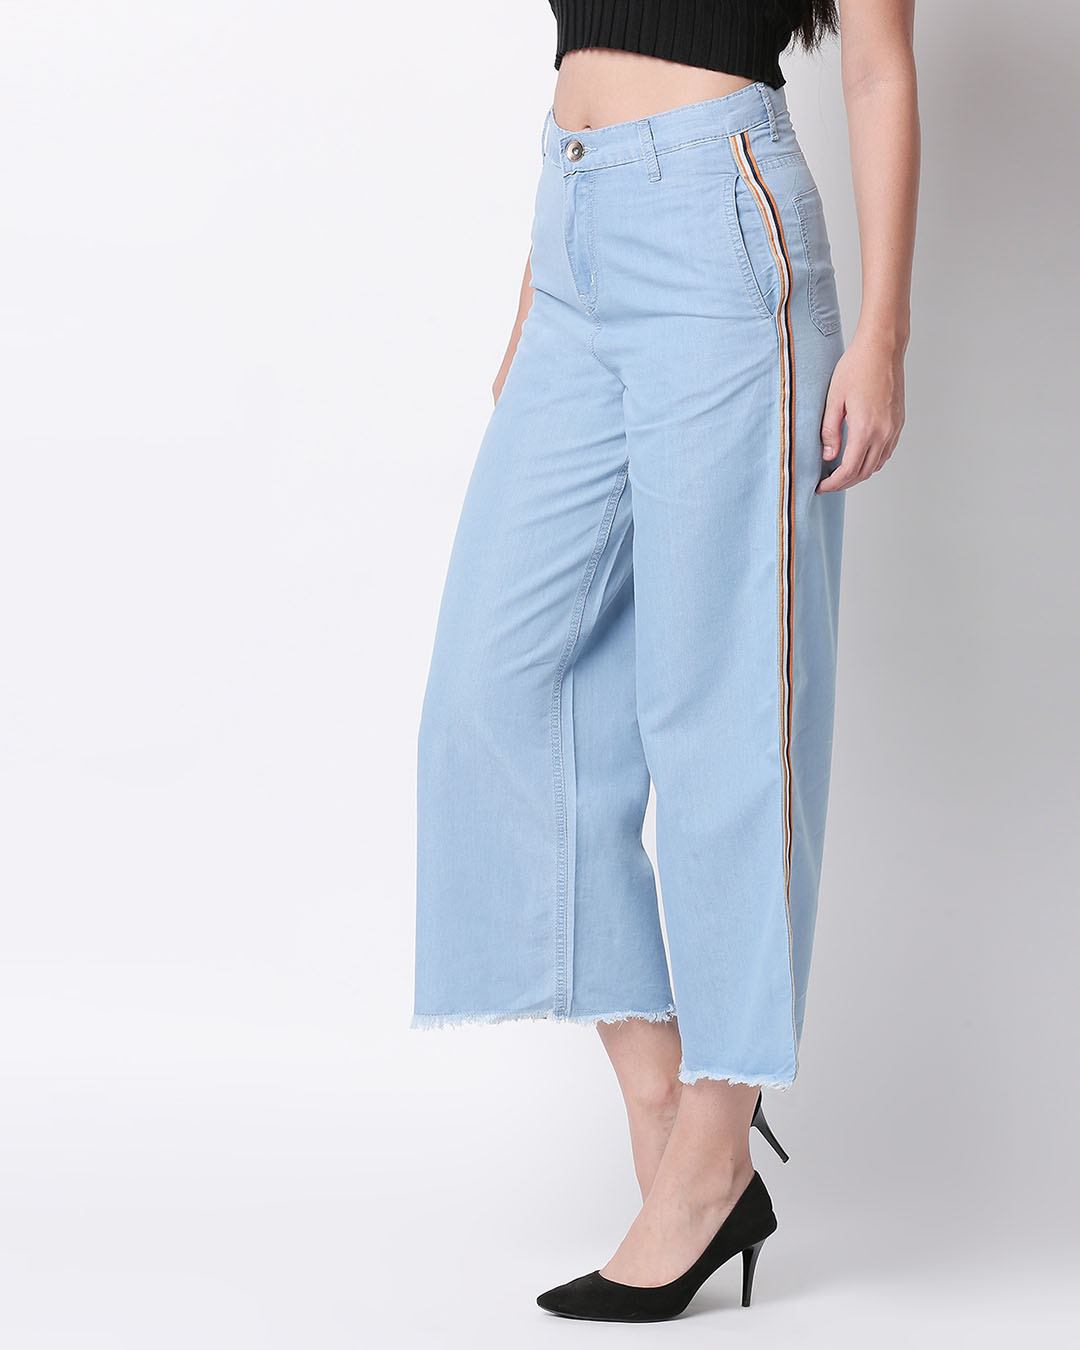 Shop Women's Blue Washed Slim Fit High Waist Palazzo-Back